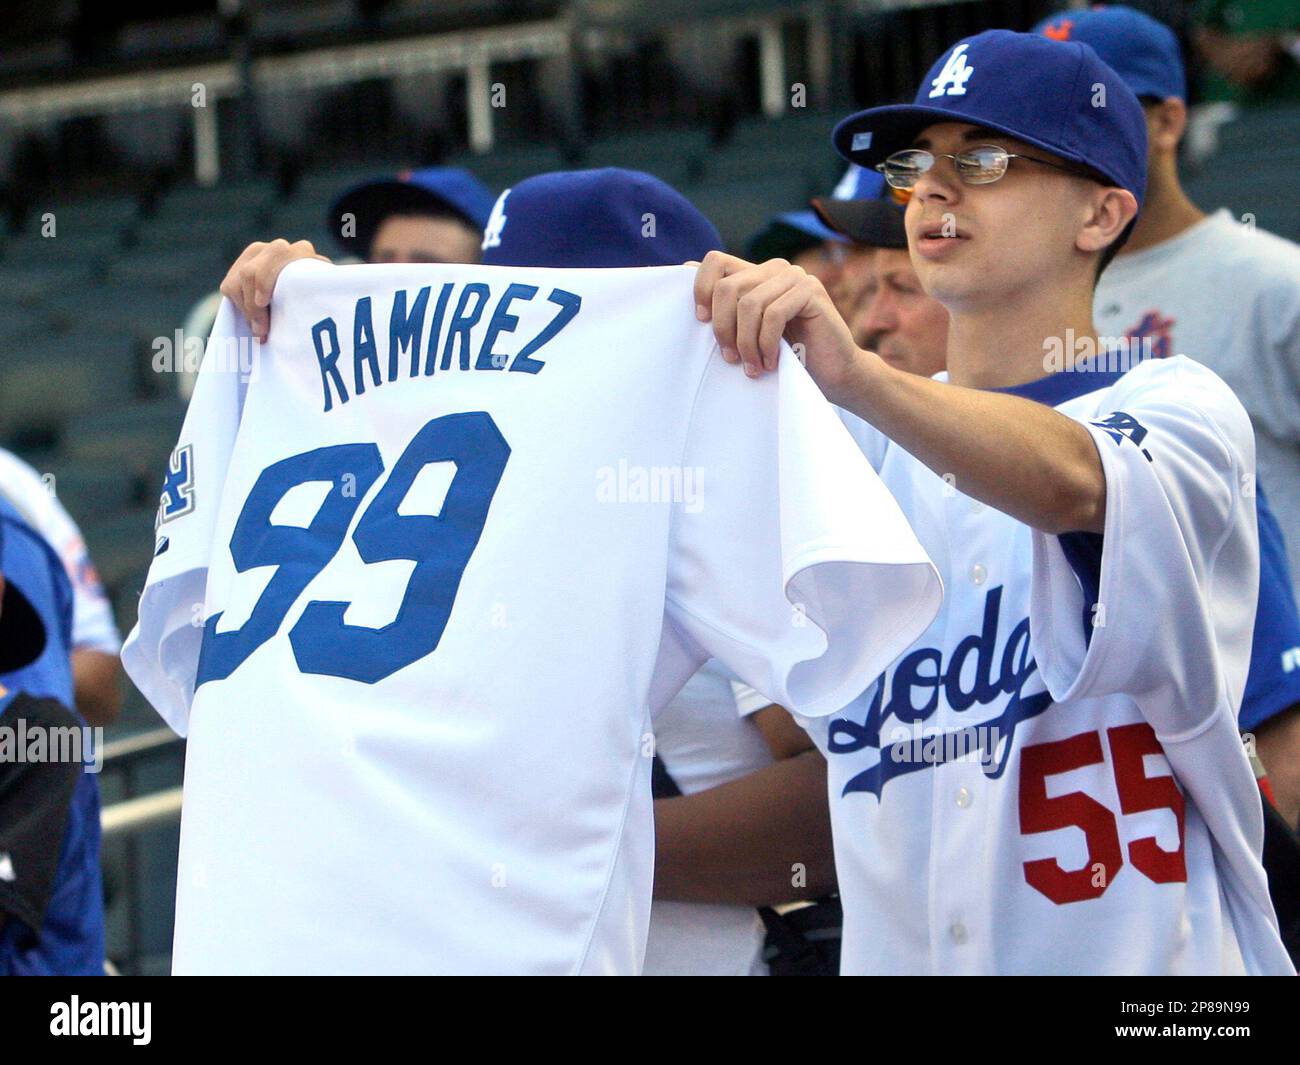 A fan holds up a jersey for Los Angeles Dodgers' Manny Ramirez